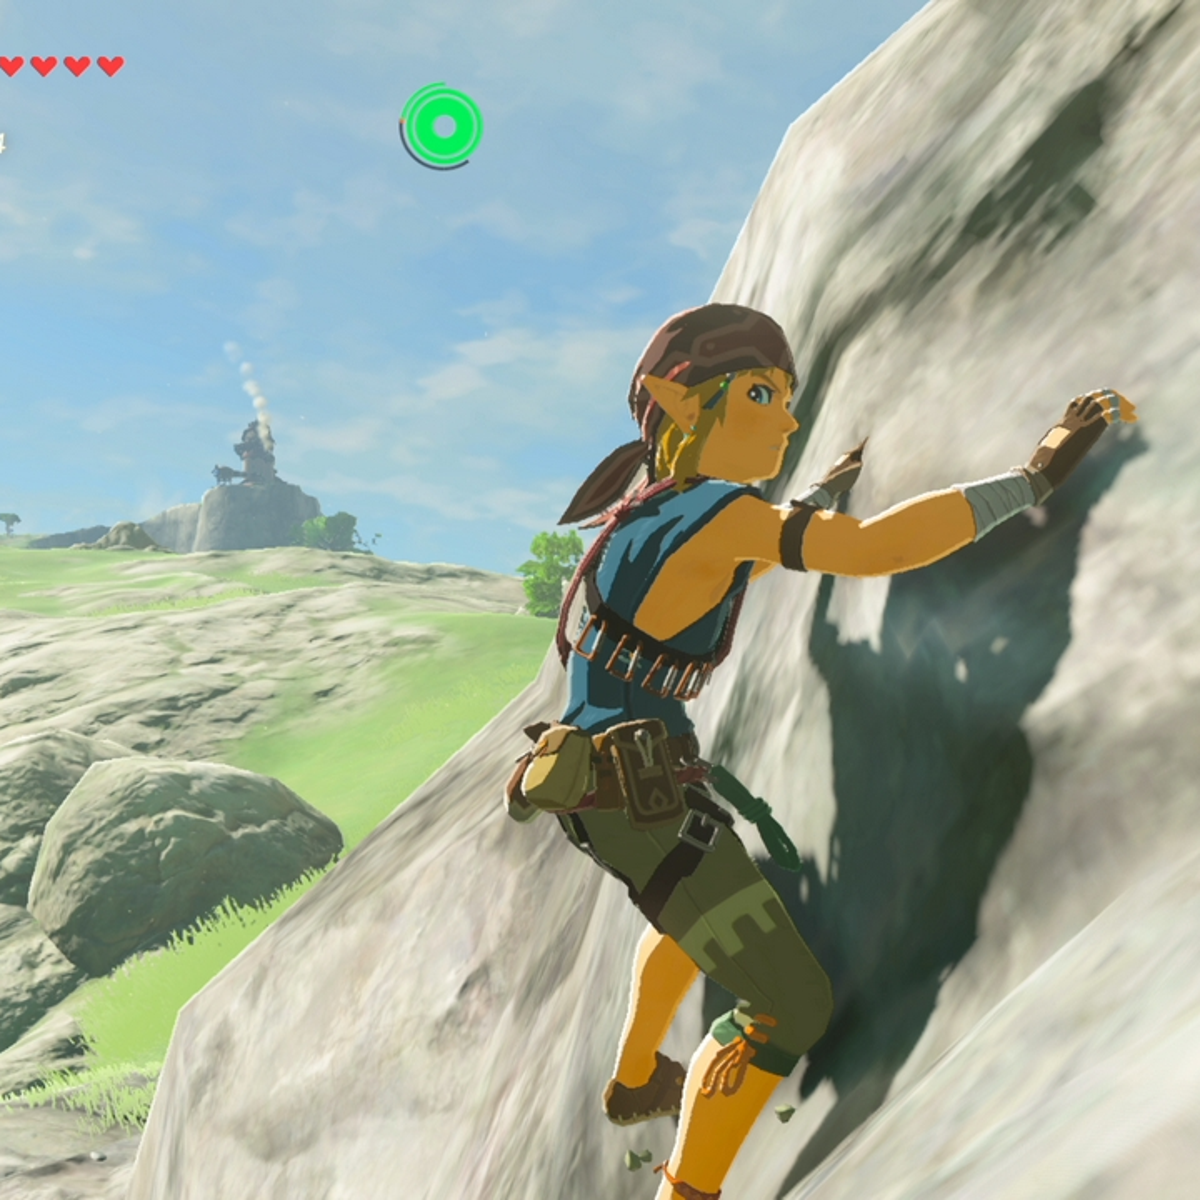 Zelda: Breath of the Wild – how to get the climbing gear armor set